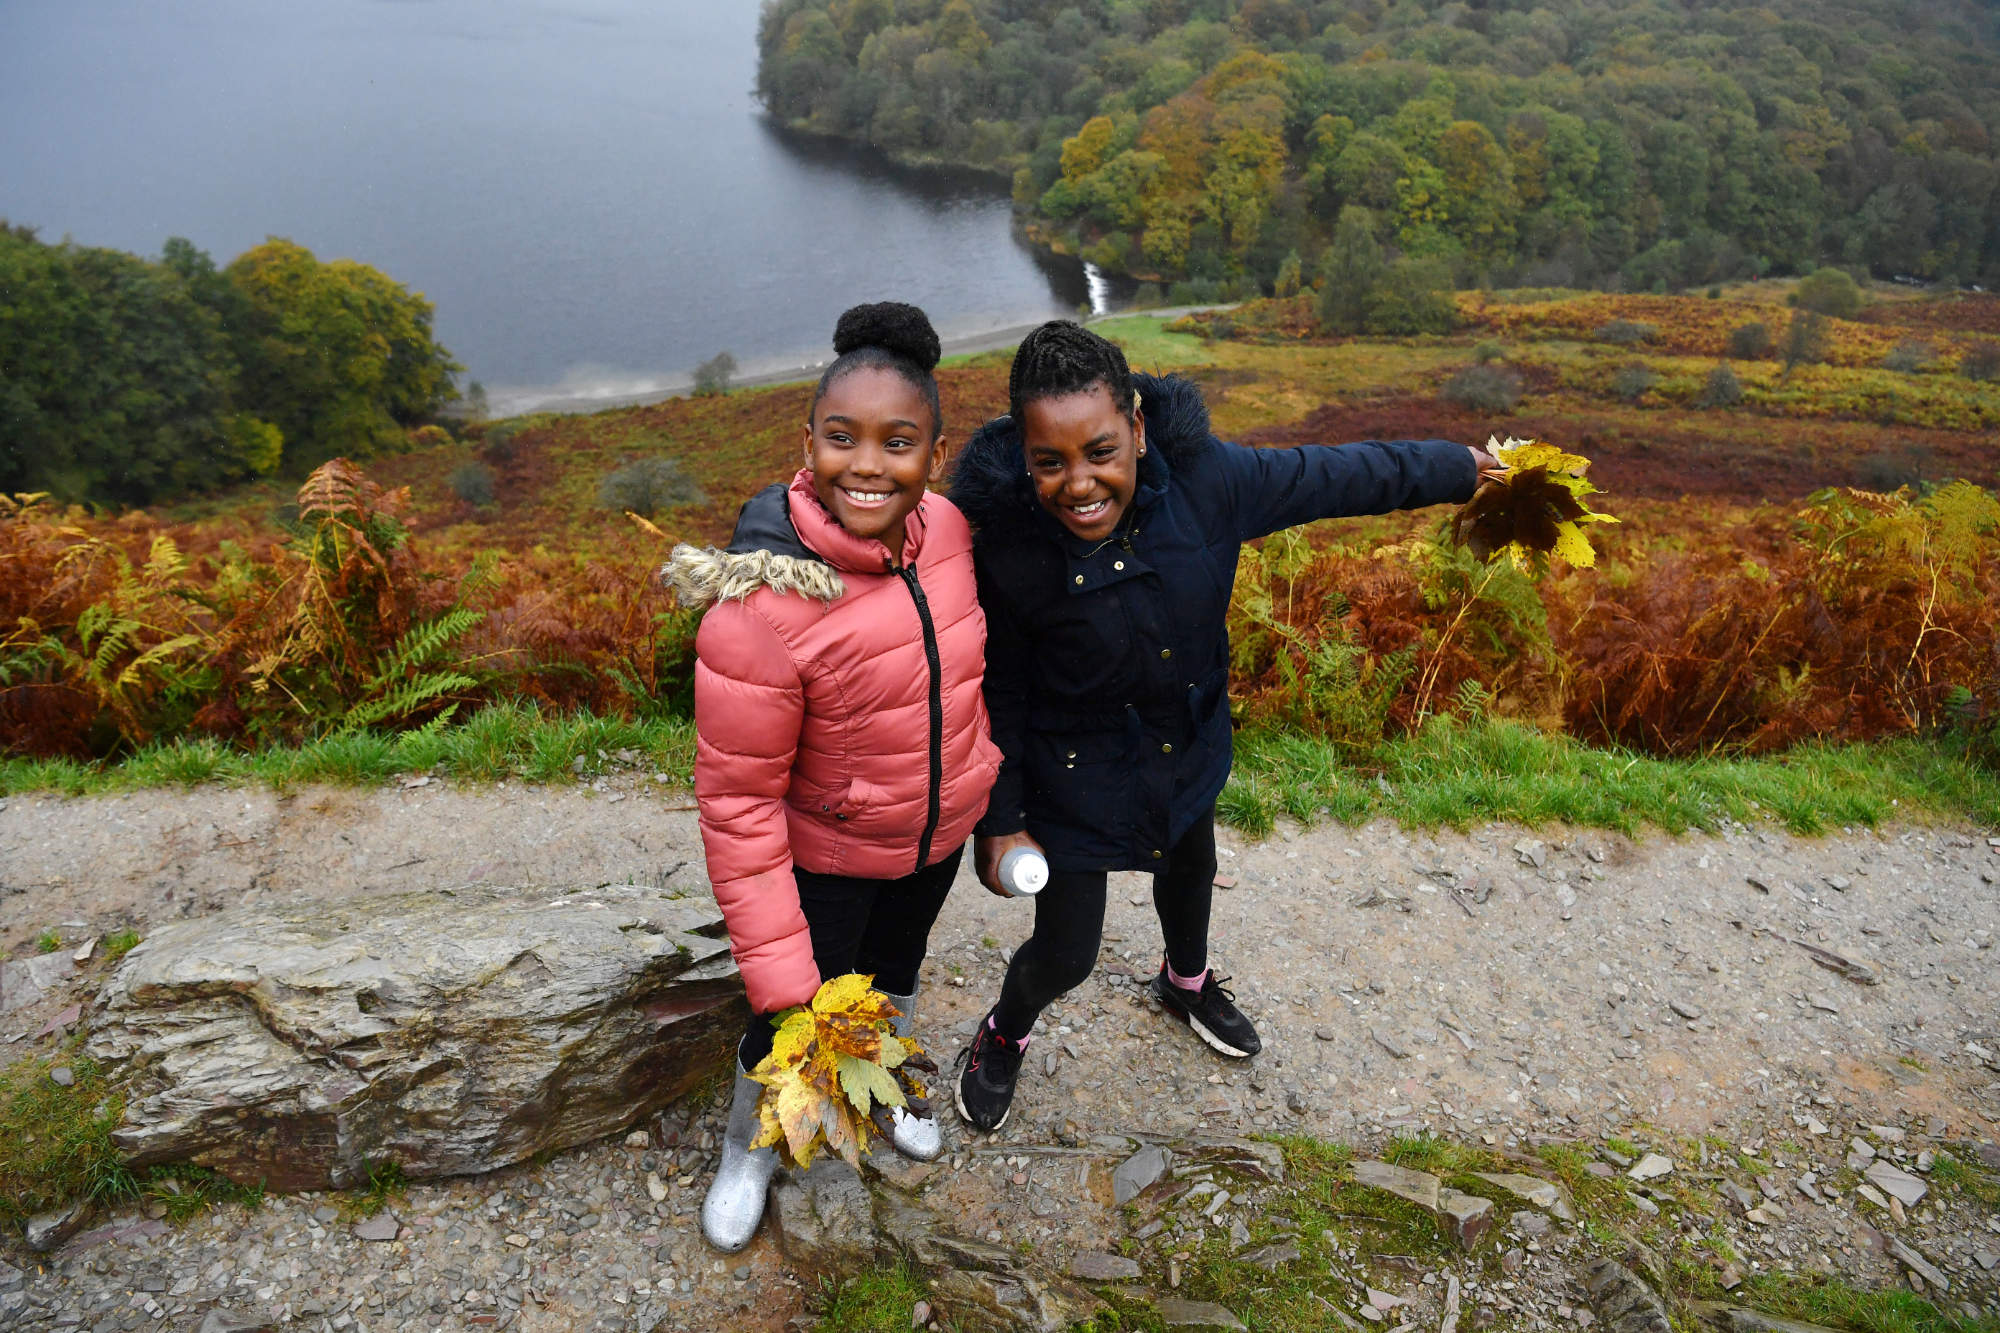 Two children stood on a trail holding bunches of leaves and smiling